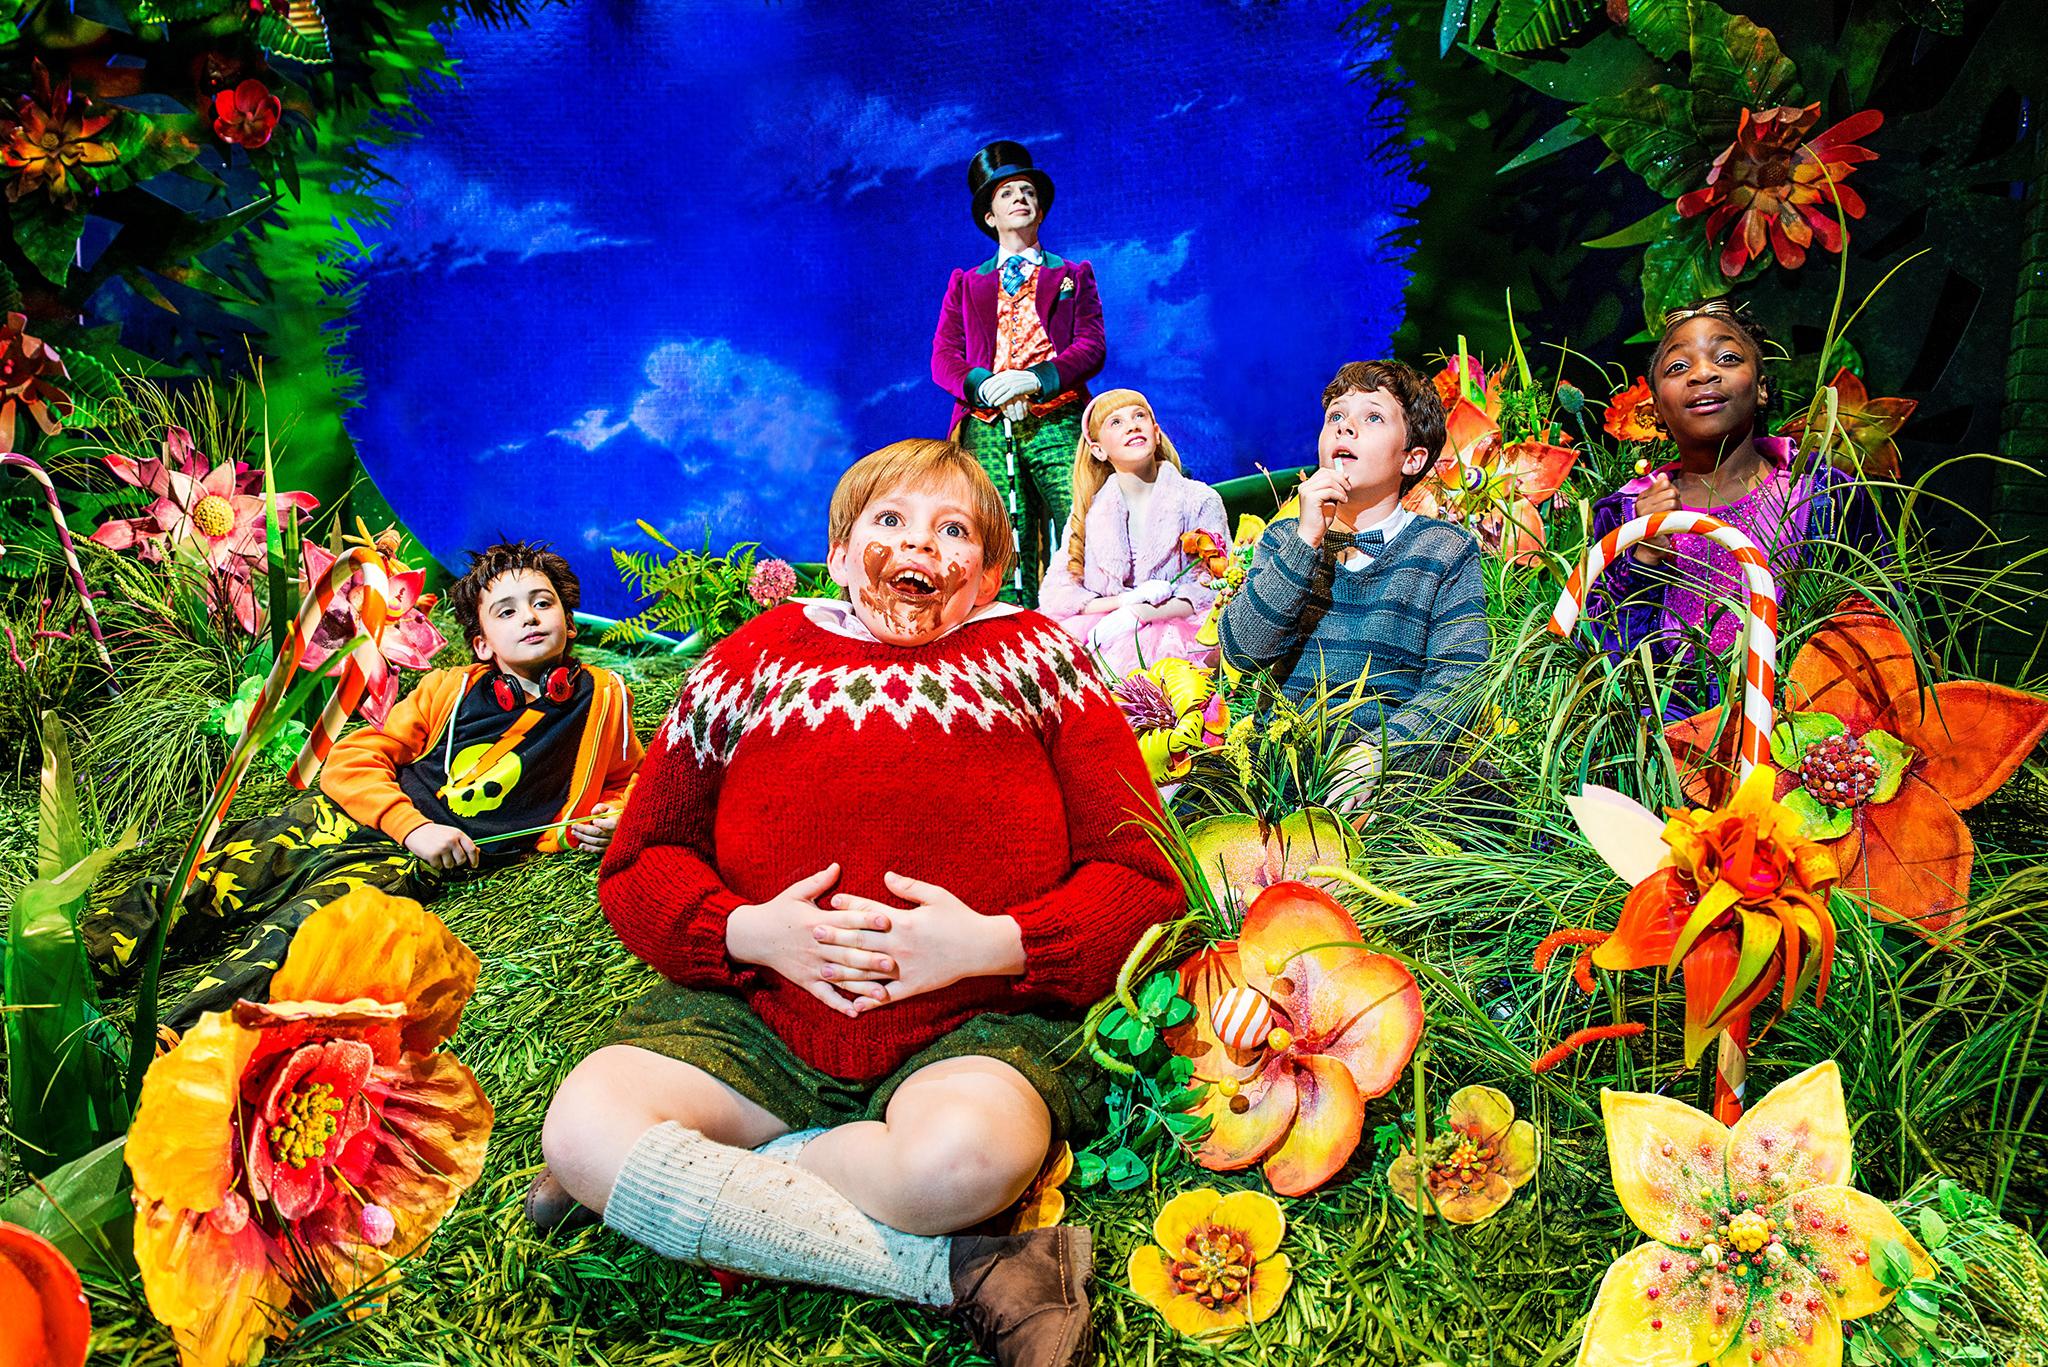 Augustus Gloop in the Charlie and the Chocolate Factory musical